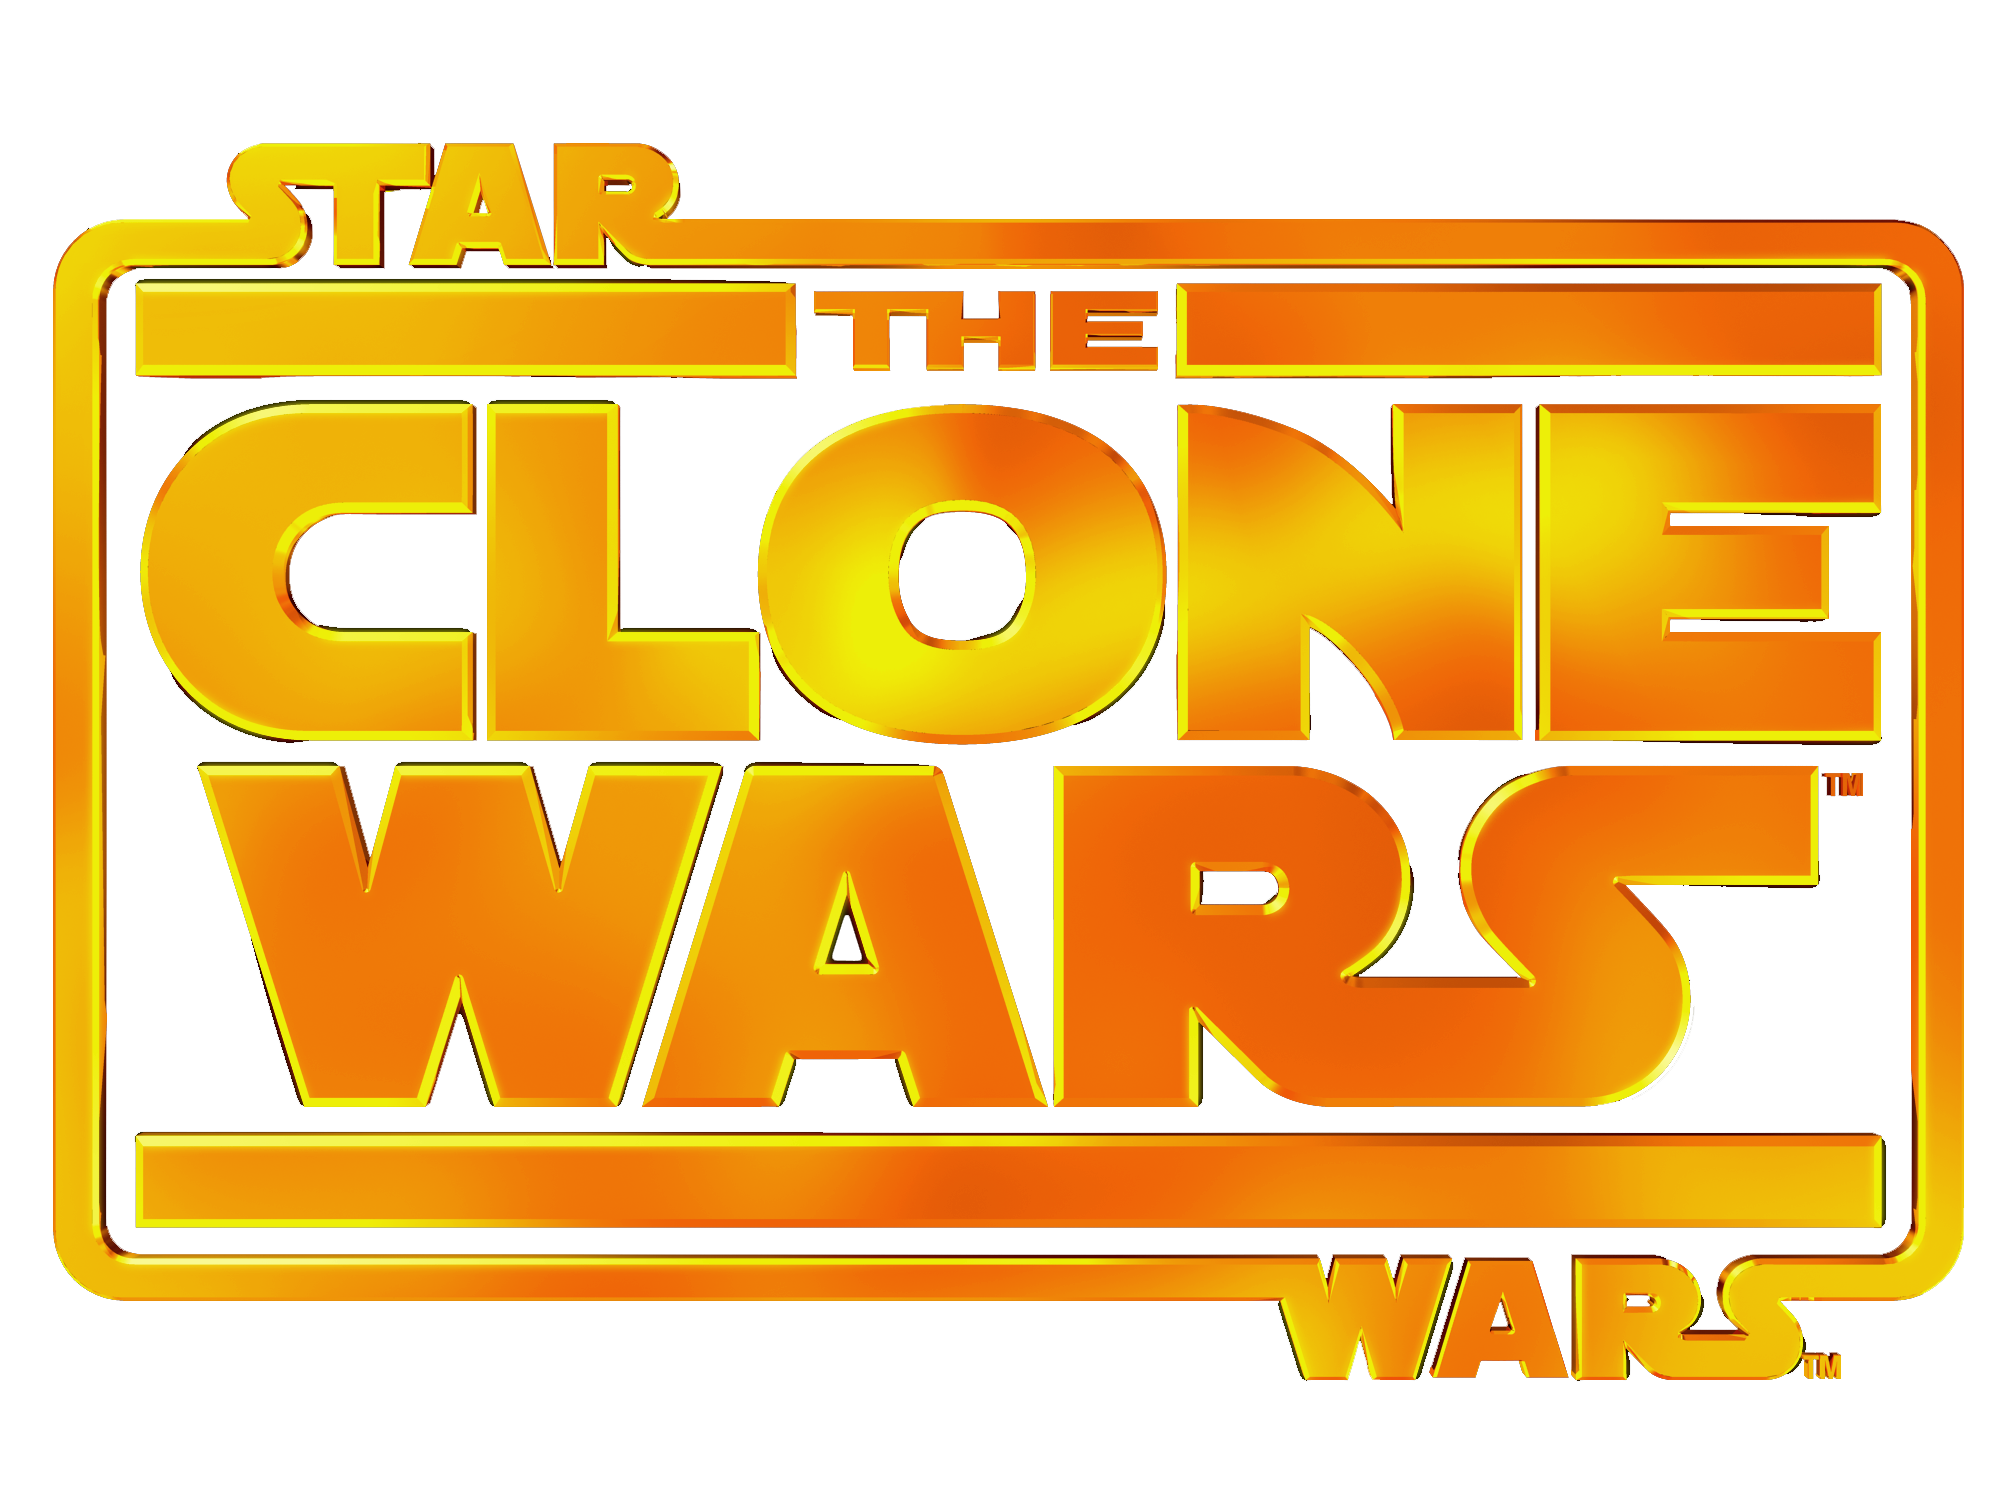 Star Wars: The Clone Wars (Blu-ray Disc, 2008) for sale online